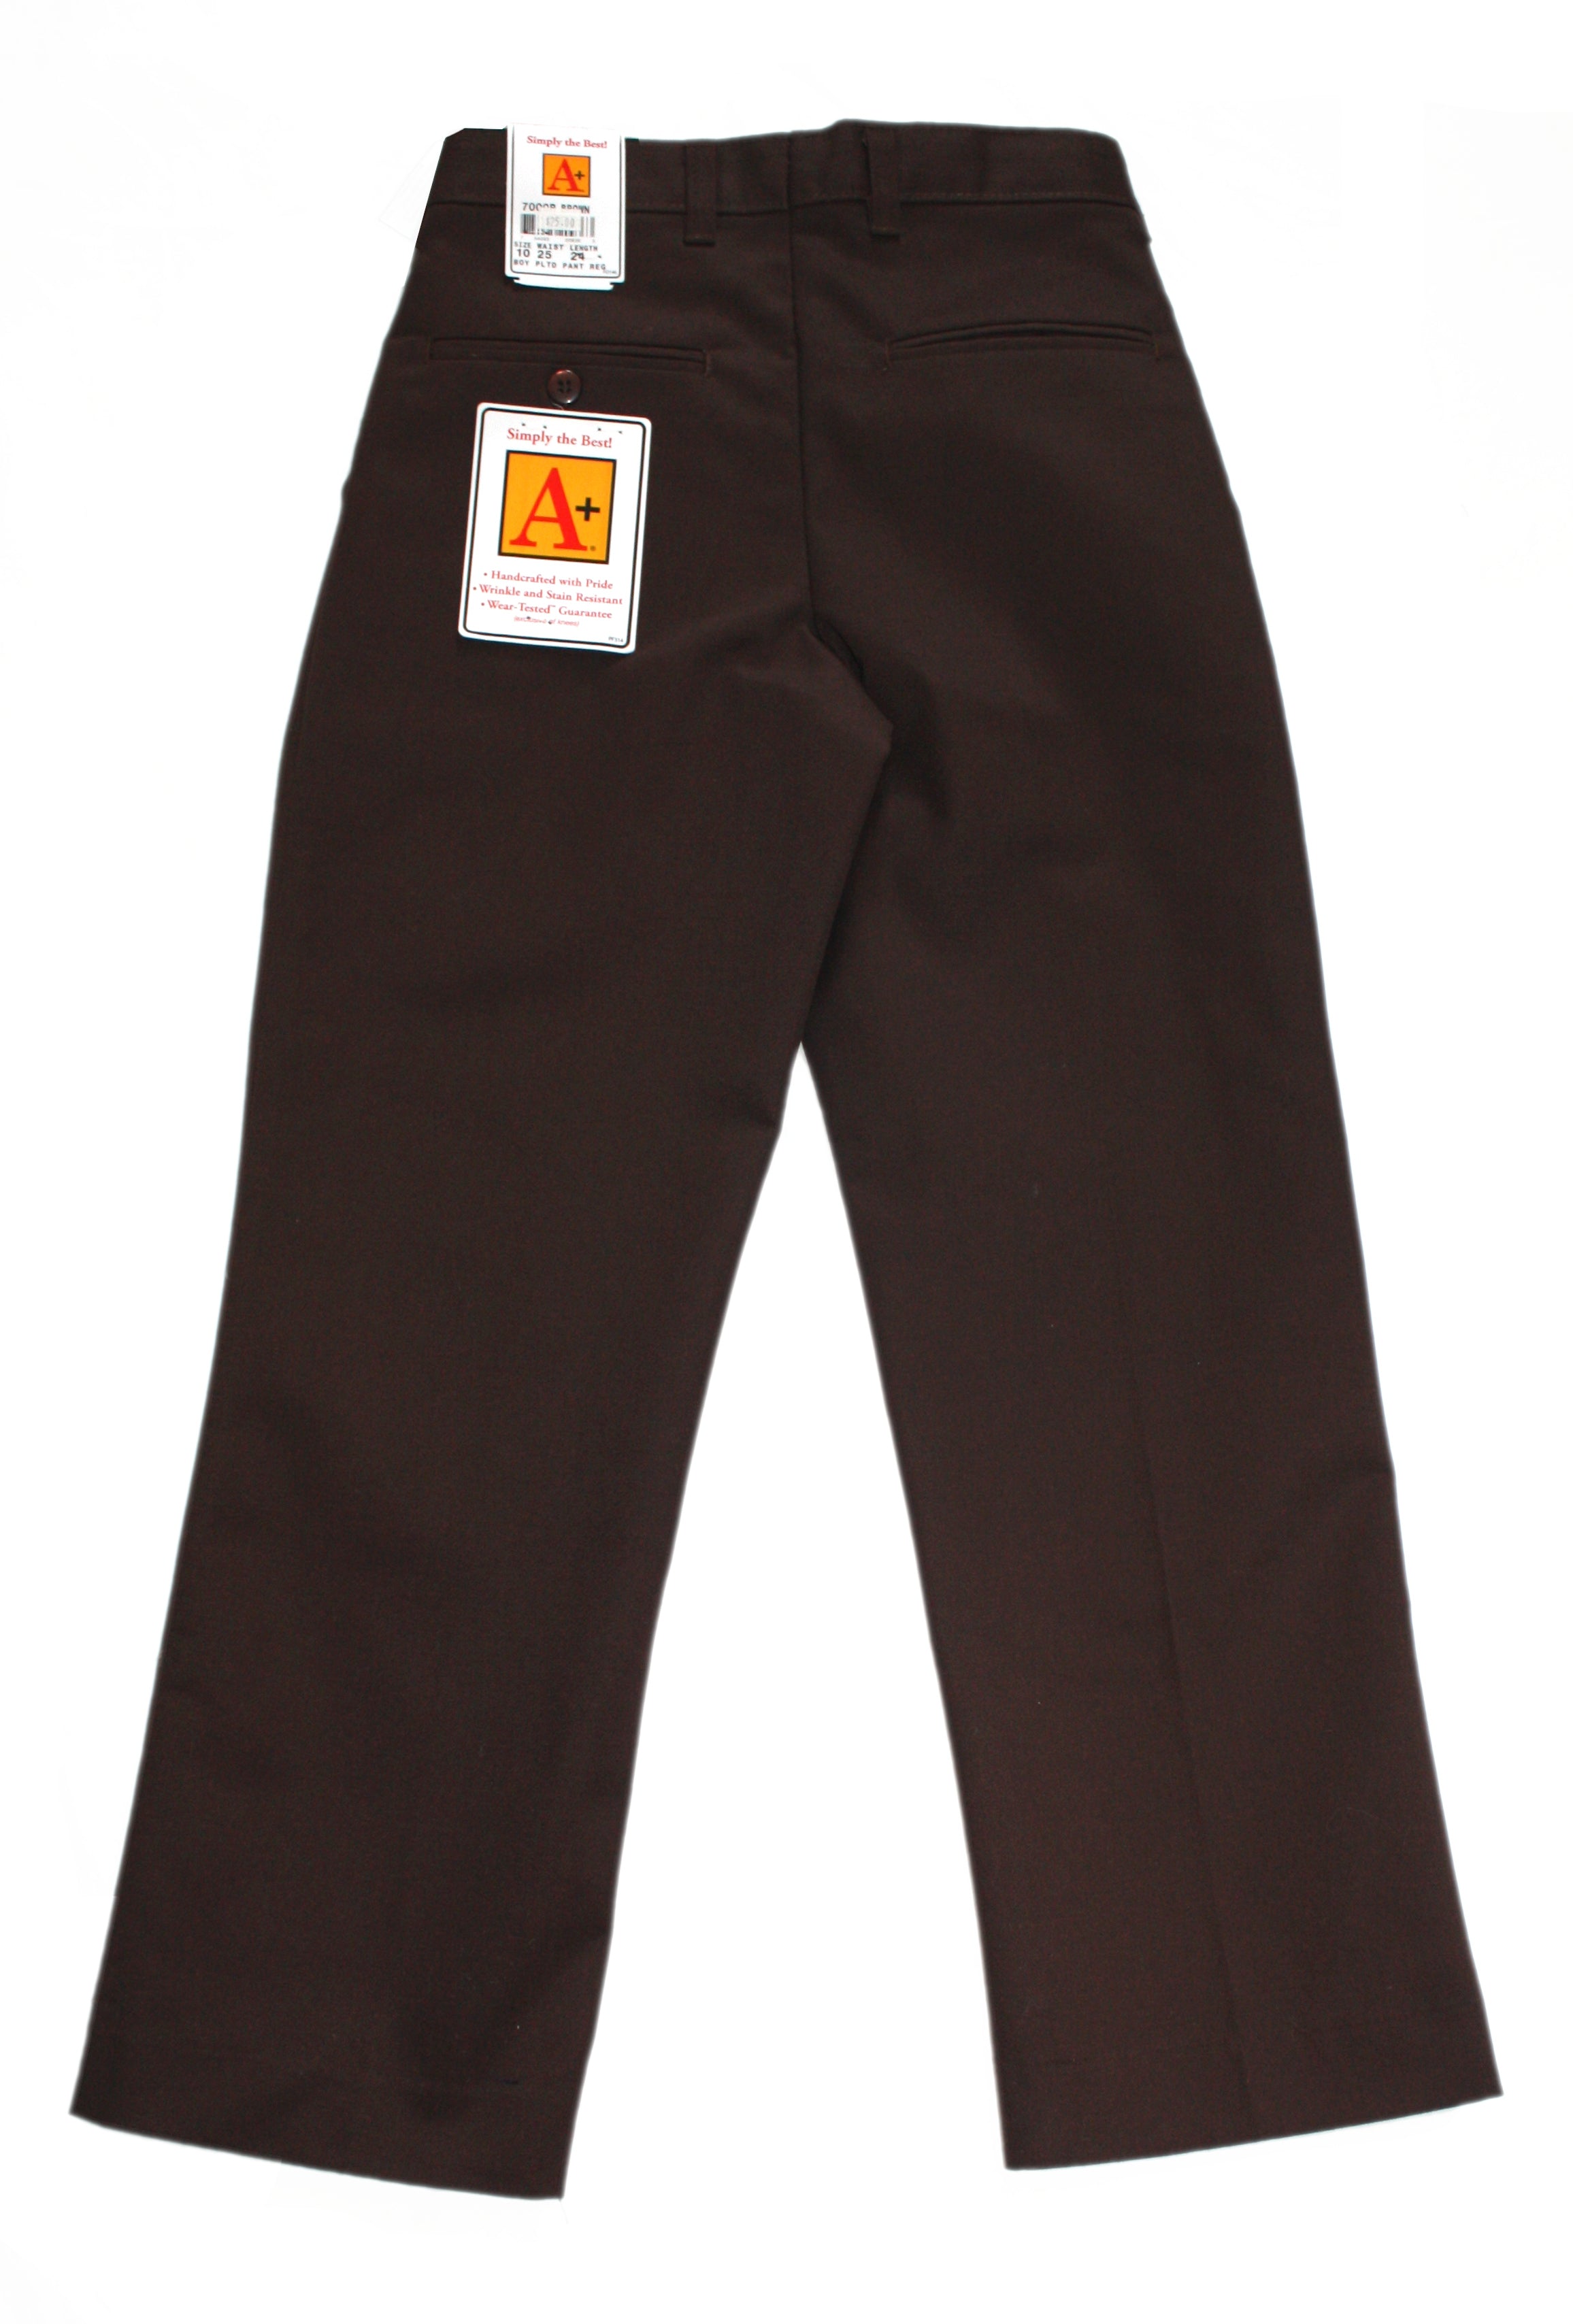 Clearance - School Apparel Boy's Regular Pleated Pant - Brown – A+